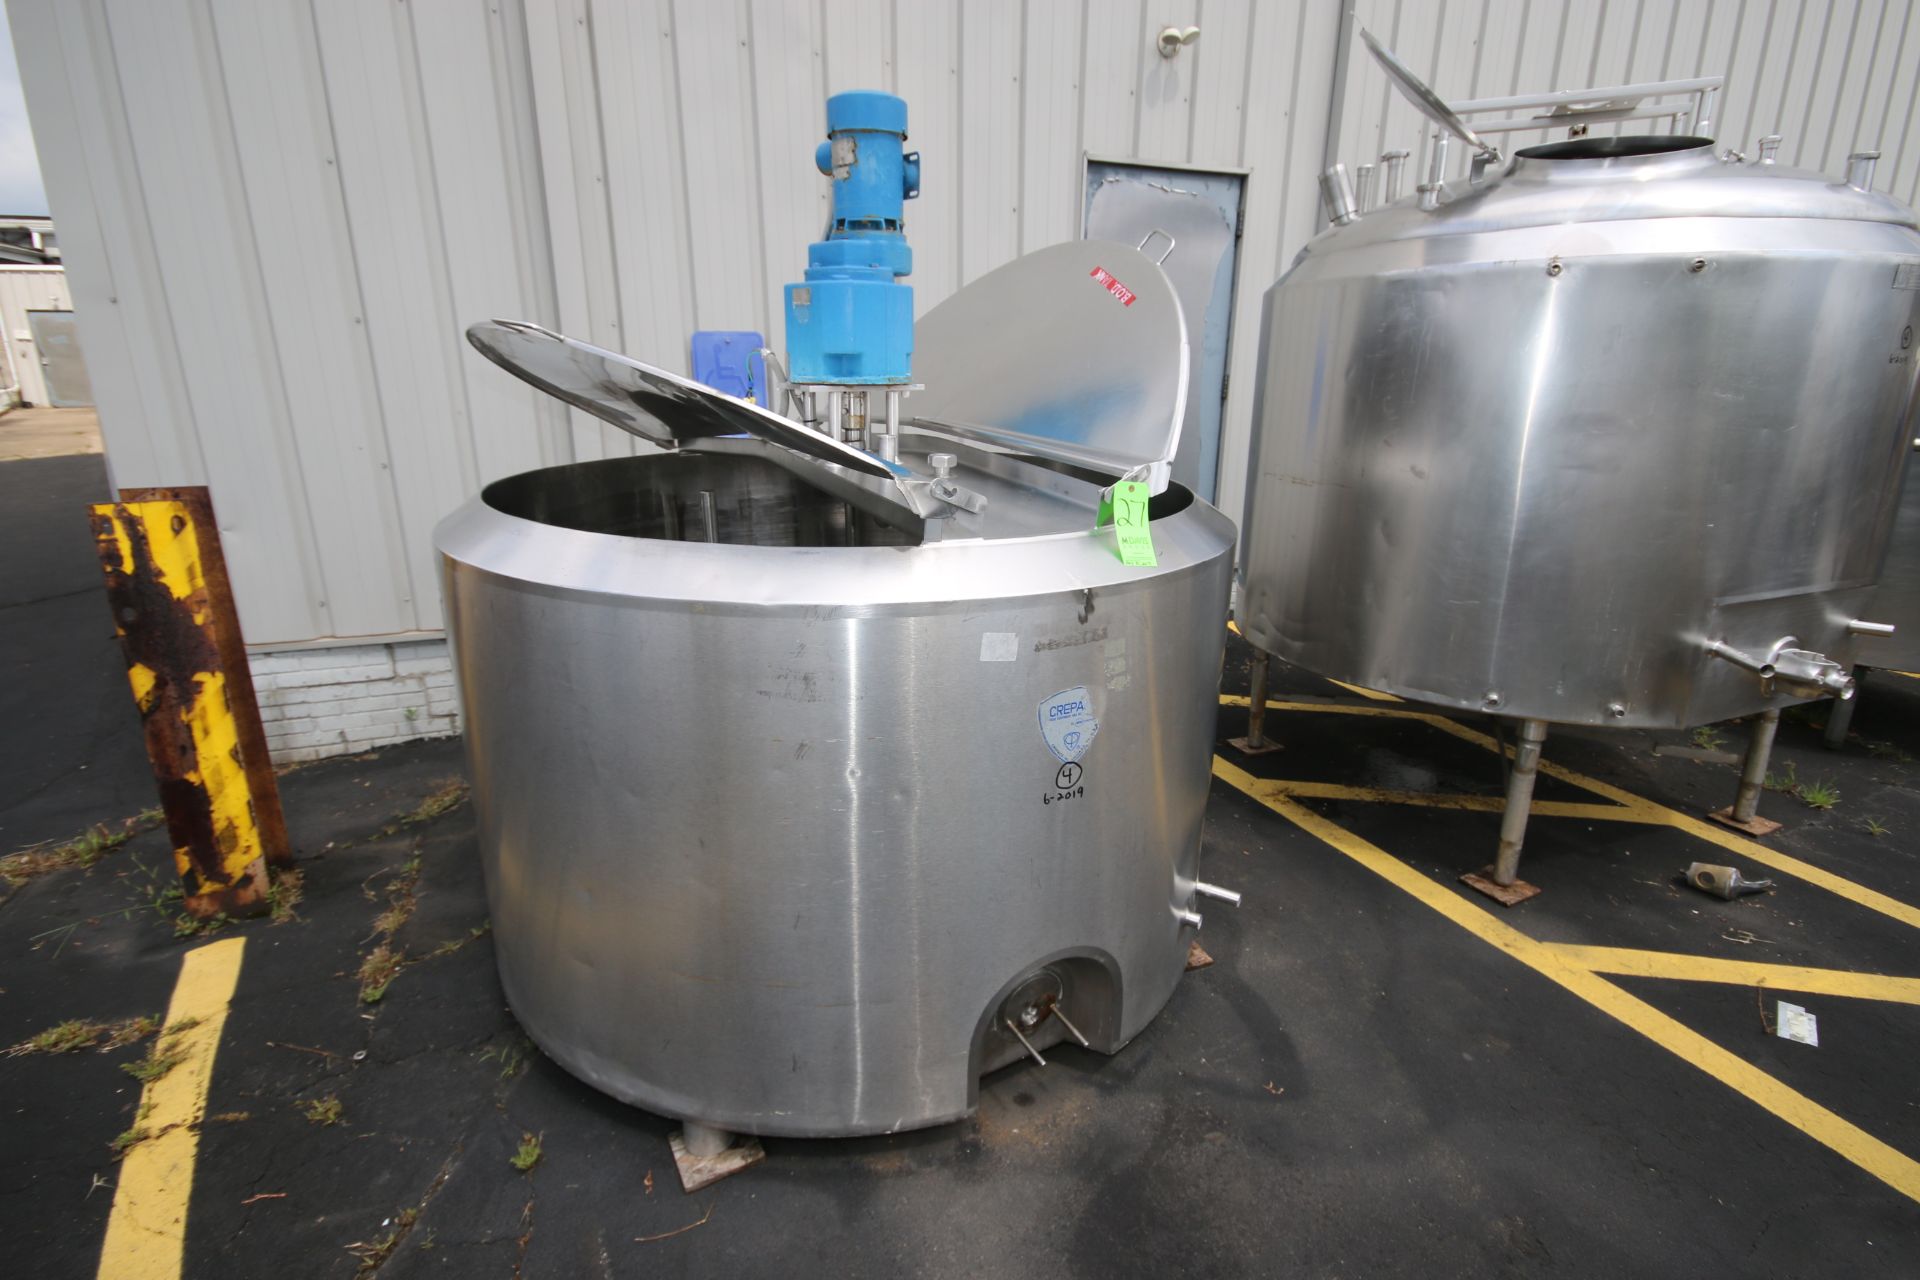 Crepaco 550 Gallon S/S Jacketed Tank, S/N C8652, Heat Exchange Jacket 50 PSIG, with CIP Spray - Image 2 of 6